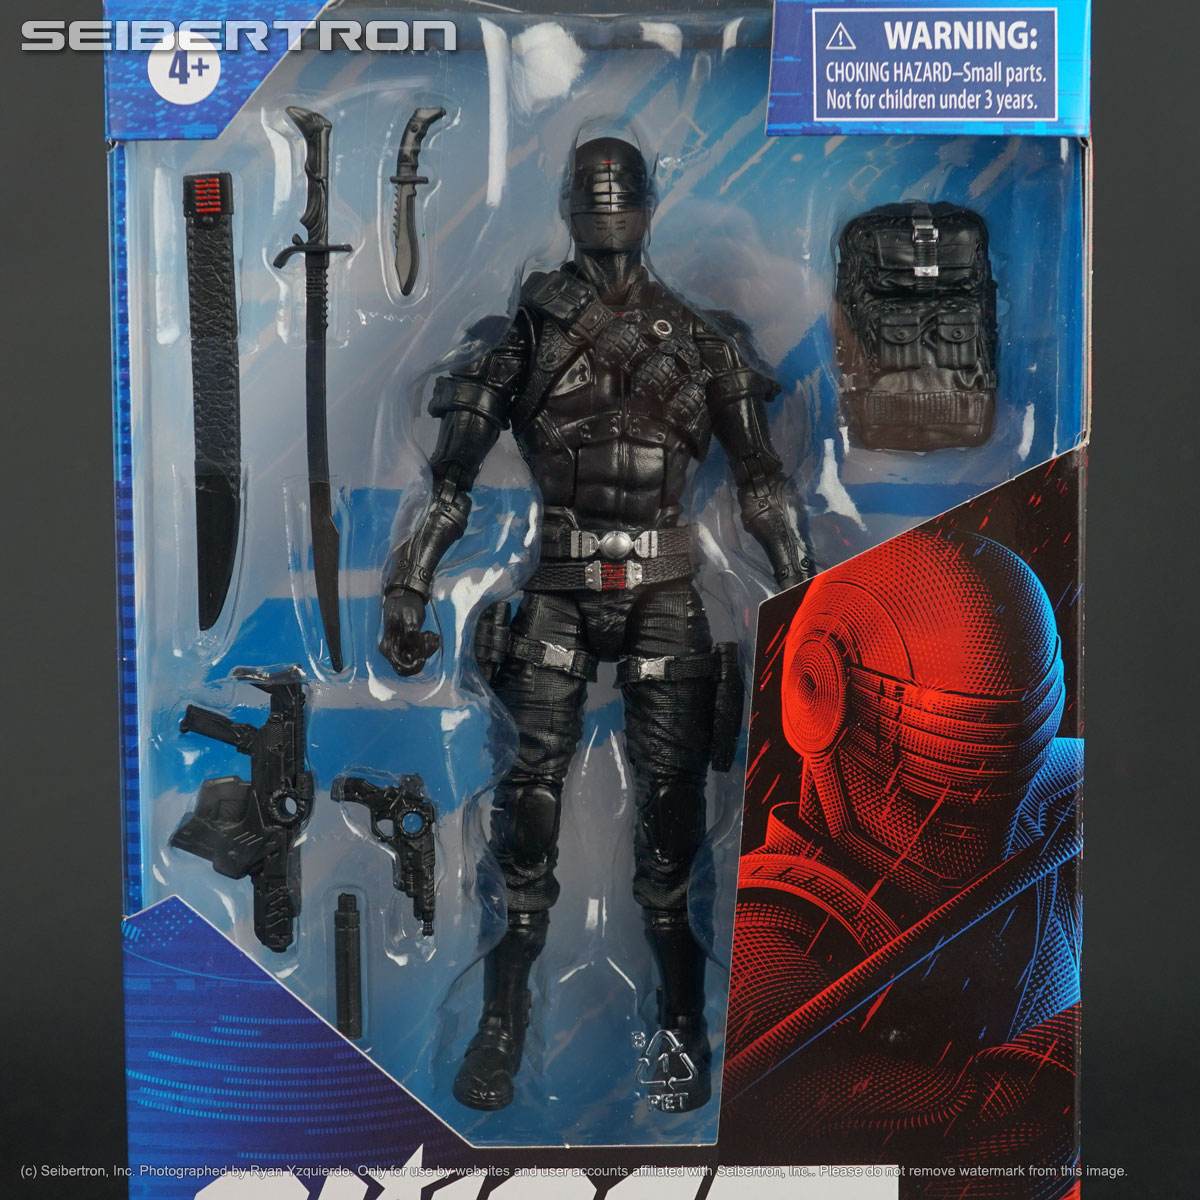 Transformers toys, Comic Books, BotBots, Masters of the Universe, Teenage Mutant Ninja Turtles, Gobots, and other listings from Seibertron.com: GI Joe Classified Series SNAKE EYES 6